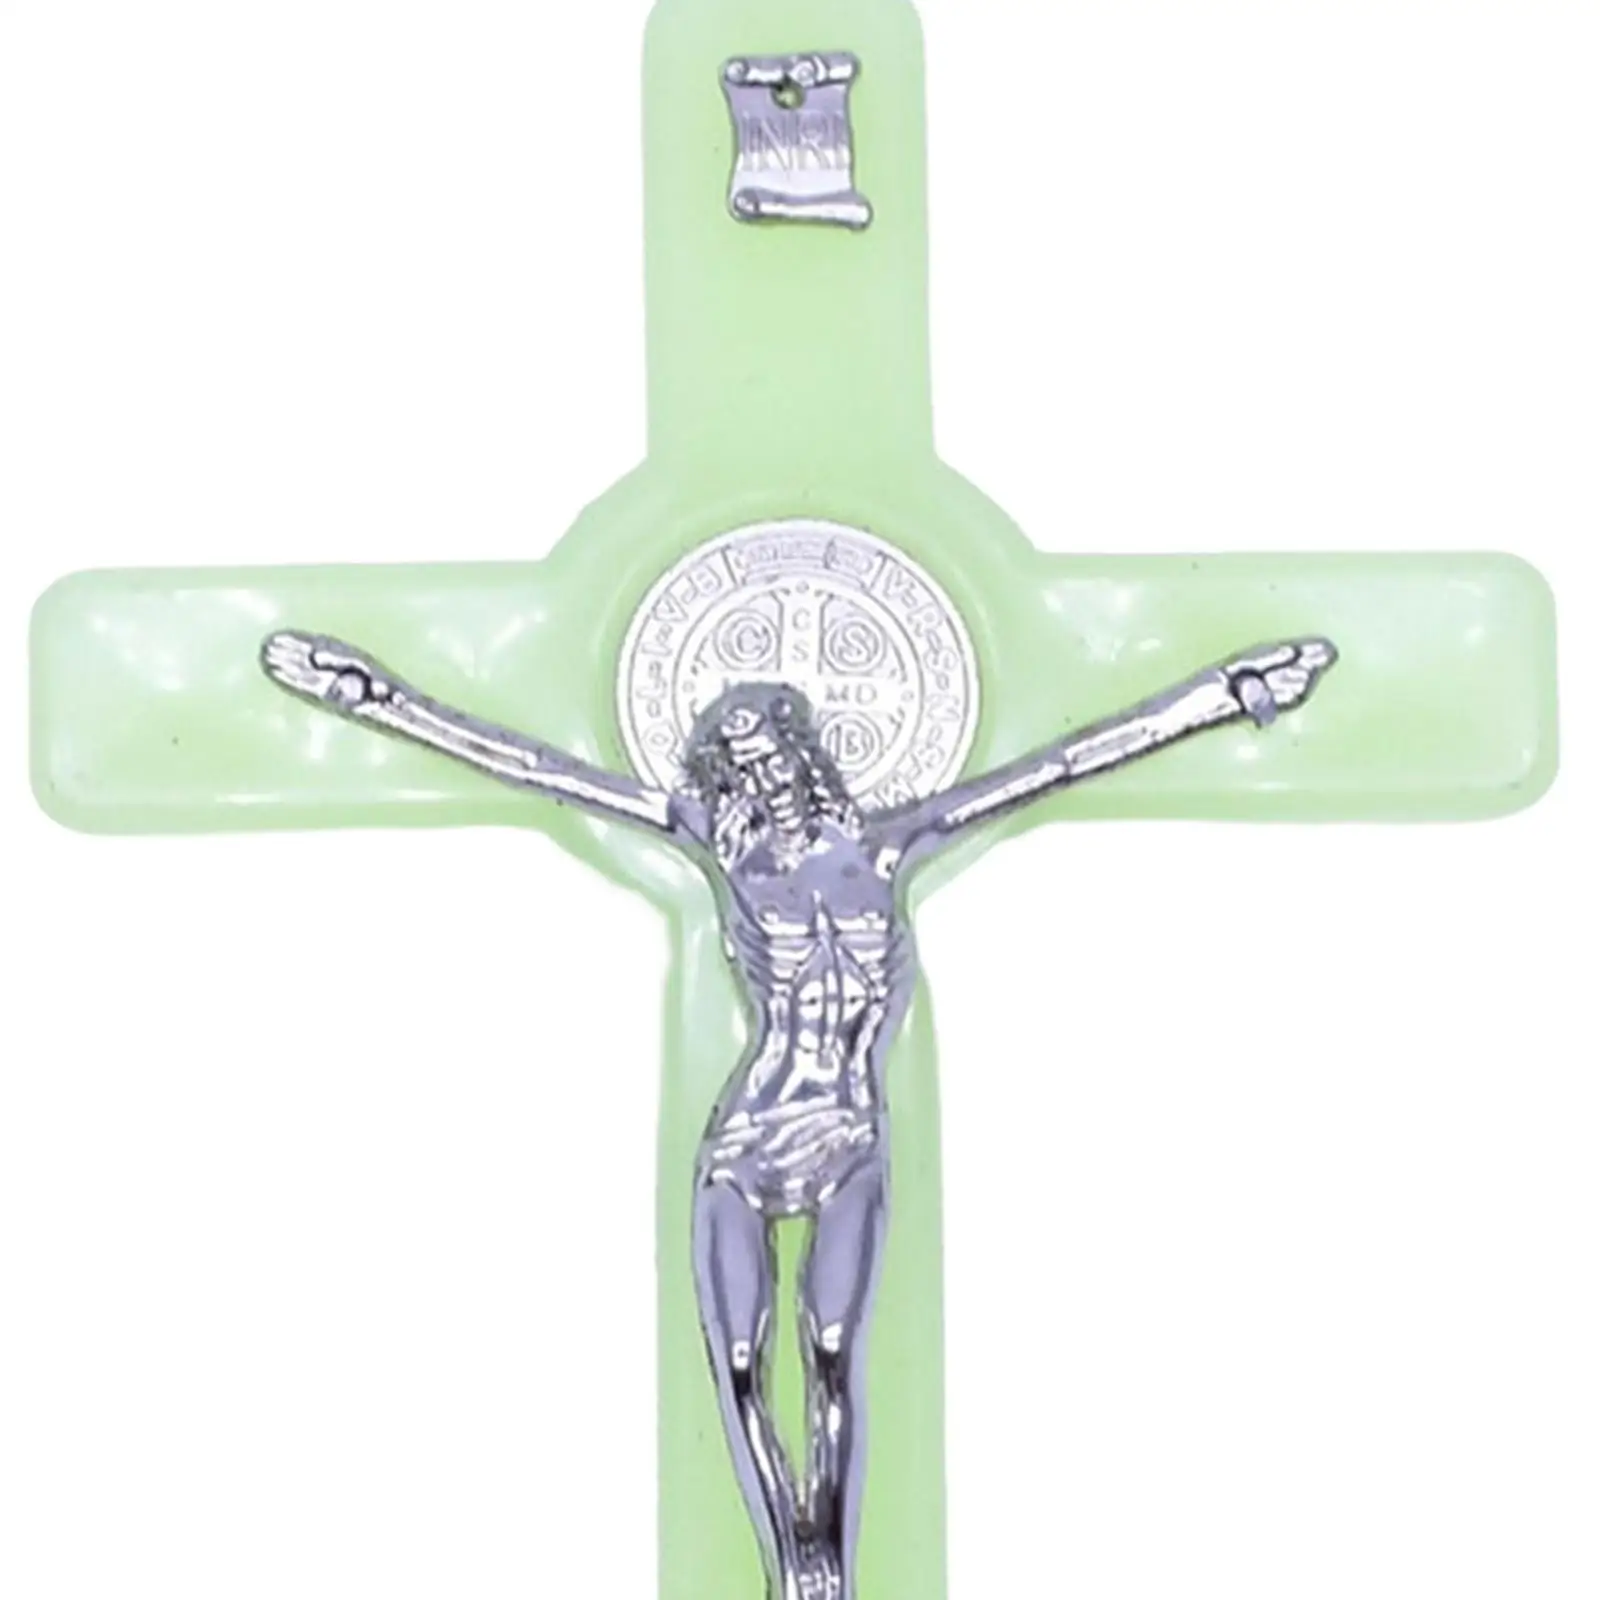 Vintage Jesus Cross Crucifix Ornament Pendant Wall Ornament Hanging Decor for Church Decoration for Home Decoration Compact